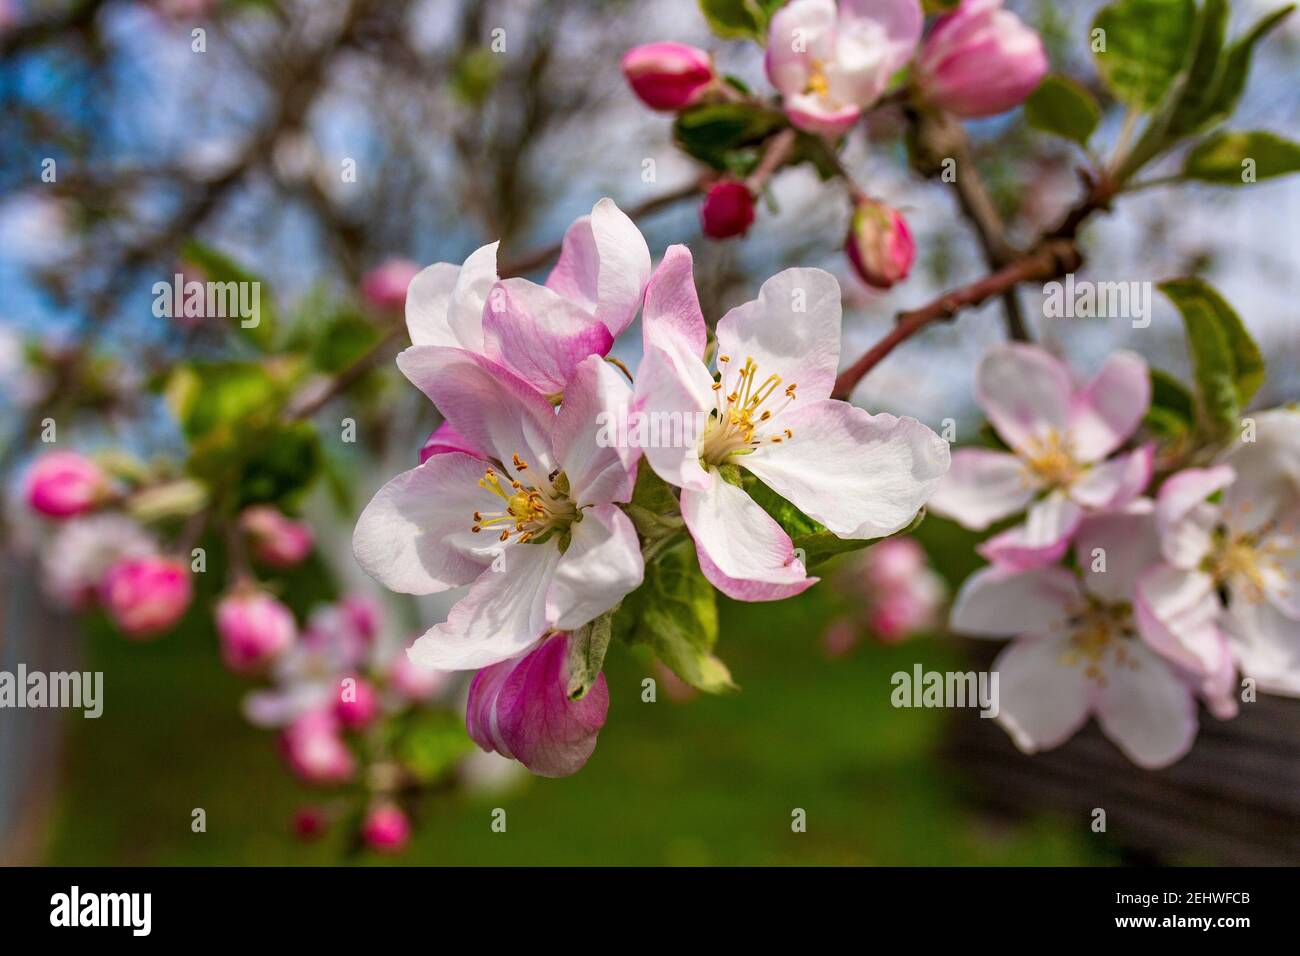 Blossoming beautiful fragile flowers and gorgeous flower buds on a separate branch of the Apple tree Stock Photo